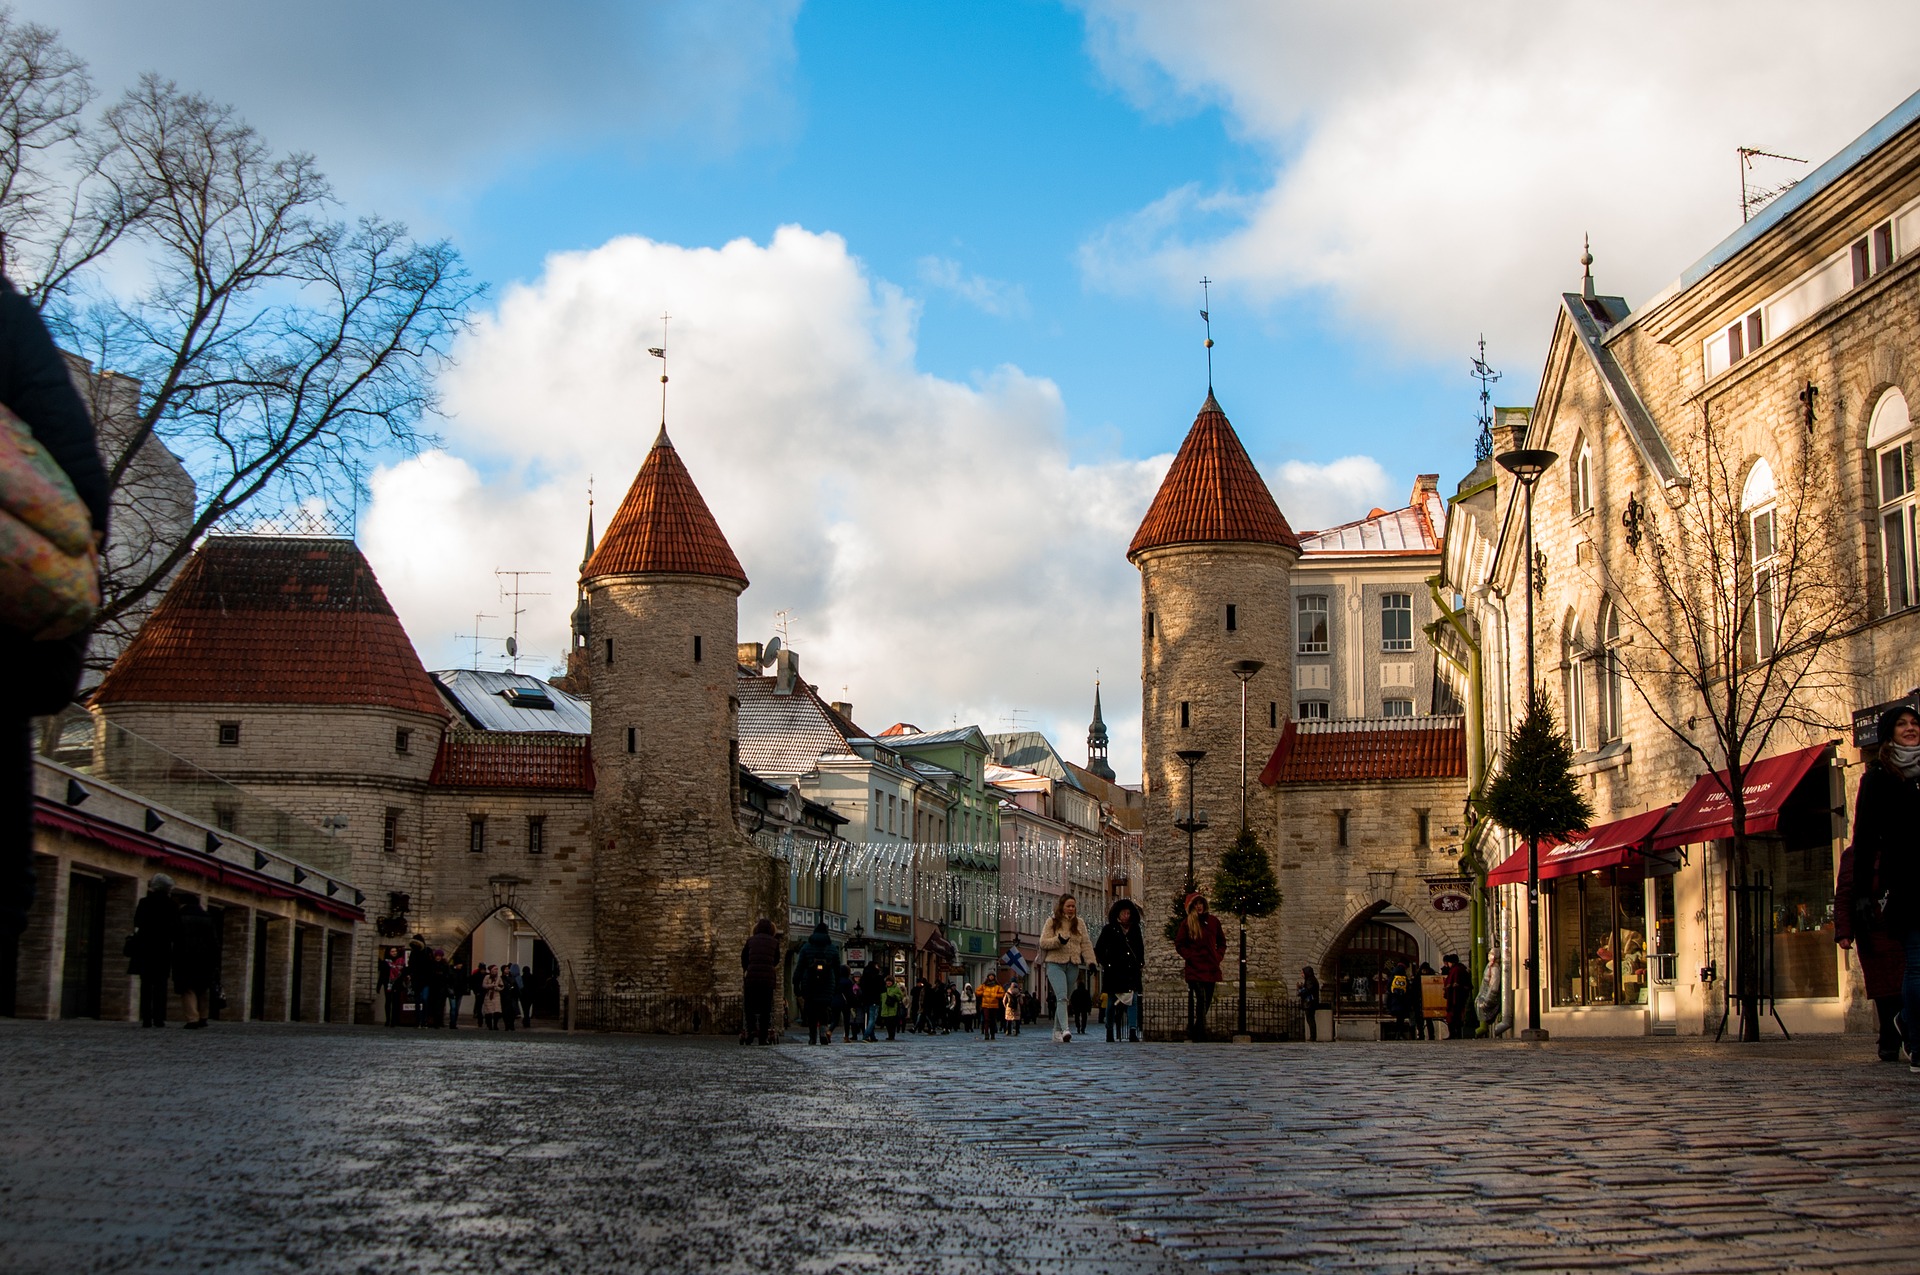 Is Tallinn a good place for foreigners? Tallinn is rapidly building an expat community, so I thought I'd ask the question, is Tallinn a good place to live? Digital nomads are flocking here in big numbers year upon year, and I’m here to tell you why? And what are the pulling factors of this beautiful medieval city? Tallinn has become popular with nomads because of its accessibility for people to work with high-speed Internet, working spaces, reasonable accommodation rates, and the Digital Nomad Visa, which offers business set up within an hour. I'm 36 years old, and my party days are not as frequent as in my early twenties. I'm halfway molding into a pipe and slippers, oldie, lol! Well, not really, but the attraction of a low population of just 1.3 million and 50% of the land being woodland makes me excited. So below, I made a list of reasons why Tallinn should be on your nomad bucket list (Lifes to short guys take the plunge, you won't regret it). Please keep reading to find out more. A City That With Historical Beauty You may be surprised to know that Tallinn's medieval old town is a UNESCO world heritage since 1997 and is beautiful and charming. You have historical hotspots like Alexander Nevsky Cathedral, The town hall, Toompea St Nicholas Churches, KIek in de Kok. The beauty is incredible, and to see this daily, will make you admire Tallinn even more. If you go outside the Old Town, you will find a vibrant modern city that's full of restaurants, cafes, theatres state of the art offices, and much more. Around the port area is the heartbeat of the city, which has a quirky feel. If you head East of the port, that's where you find new shopping centers and businesses. Also in this area, you have the airport not too far away. How Much Is An Apartment? Overall the city is still cheap to live and pretty reasonable with over costs. You can get a lovely modern apartment for around 700 to 1000 euros. In comparison to over cities in Europe like London, Paris, and Berlin you are paying less. But more expensive than Sofia, Beaucorest, Riga, and other central European countries. A good rule of thumb is the further away from the city center, the cheaper it gets, so it depends on what you're after? Other average spends Milk in Supermarket €.75 ($.91) Meal In Old Town €25 ($30) A Bus to Parnu €7 ($6) Average coffee Price €2.80 ($3.40) Crime- Here's What to Know Tallinn, on the whole, is safe. You never feel unsafe, which is just another reason why Tallinn is so great. You do get some pickpocketing and petty crime, mainly in tourist areas—the three places you need to be careful of are the City center, Lasnamäe, and Kopli. But again, this is rare and shouldn't damper your attitude towards Tallinn. Wear a money belt clip and carry cash if you feel its necessary, but again you will be fine, and theirs no reason to feel unsafe here. Tram, Busses, and Bikes Tallinn has some of the best public transport in Europe and even gives free transport to locals, which is incredible. The network of trams, buses, and trains that Soiduplaan runs (local authority) is efficient and can zip you around the city in no time. The payment system runs from a smart card which you can top up from www.pilet.ee a simple, quick method to get about. You also buy paper tickets for one-way journeys. Tallinn's Foodie Guide Estonia itself is not renowned for its cuisine, but its incredible, and the soups are excellent. I'm a big fan of Borsh (Beetroot Soup). You have to try it! Estonians eat a lot of Mashed potatoes, fish (Salmon Mainly), meat, and vegetables. If I was a critique, maybe you could say the foods not diverse enough, but Estonian food is fantastic, you will love it. Do You Need You Brollie?- Tallinn's Climate Review Estonia has a mild summer overall, and a has bleak winter that gets cold quickly from September. The summer is beautiful with plenty of hiking, beaches, and picnics with highs of 25 degrees with a few rainy days. The winter is cold and dark and gets windy fast. Estonia is one of those countries where you get four seasons in one day. If you are coming to Estonia, pick the summer over the winter. You can do so much more. Internet speed & Where To Work/Network Tallinn has some of the best coworking spaces in Europe, With super-fast Wi-Fi full pretty much everywhere. Two of the most significant coworking spaces are Lift 99 and Spring hub. You get a desk and a nice working space, it's an excellent place to meet people and network. Lift 99 starts at 200 euro's p/m & Spring Hub starts at 160 euro’s p/m. For smaller budgets, you can always find other coworking spaces for 100 euro's a month. If your not after a coworking space, you have a great selection of coffee shops with excellent Wi-Fi. Most coffee shops have fantastic coffee and snacks to keep you working for hours. Tallinn's HealthCare System Overall, Estonia's public healthcare system is quite good, but if you want private medical insurance that isn't too expensive, there are many options. It's also worth mentioning many doctors speak English and have a good training level in inpatient care. Will You Make Friends? – Meet The Locals In general, Estonian people are open and talkative, which is beneficial if you want to make friends. They also a little shy compared to western Europeans You also have a diverse Society in Estonia, which comes from the old Soviet Union days. If you don't have Estonian ancestry, you are considered a bit of an outsider and can't even vote or travel without a visa.If you've never been to Estonia before, you'll probably pick this up when you arrive. Society is a little segregate in a way. But overall, Estonia is on the up and again is and open-minded Give Tallinn a Try? I think Estonia is a real gem of a country. You can have a real positive experience here with the West losing its charm and Tallinn catering to digital nomads superbly. With half the country covered in woodland, its sounds like heaven to me. What you waiting for?